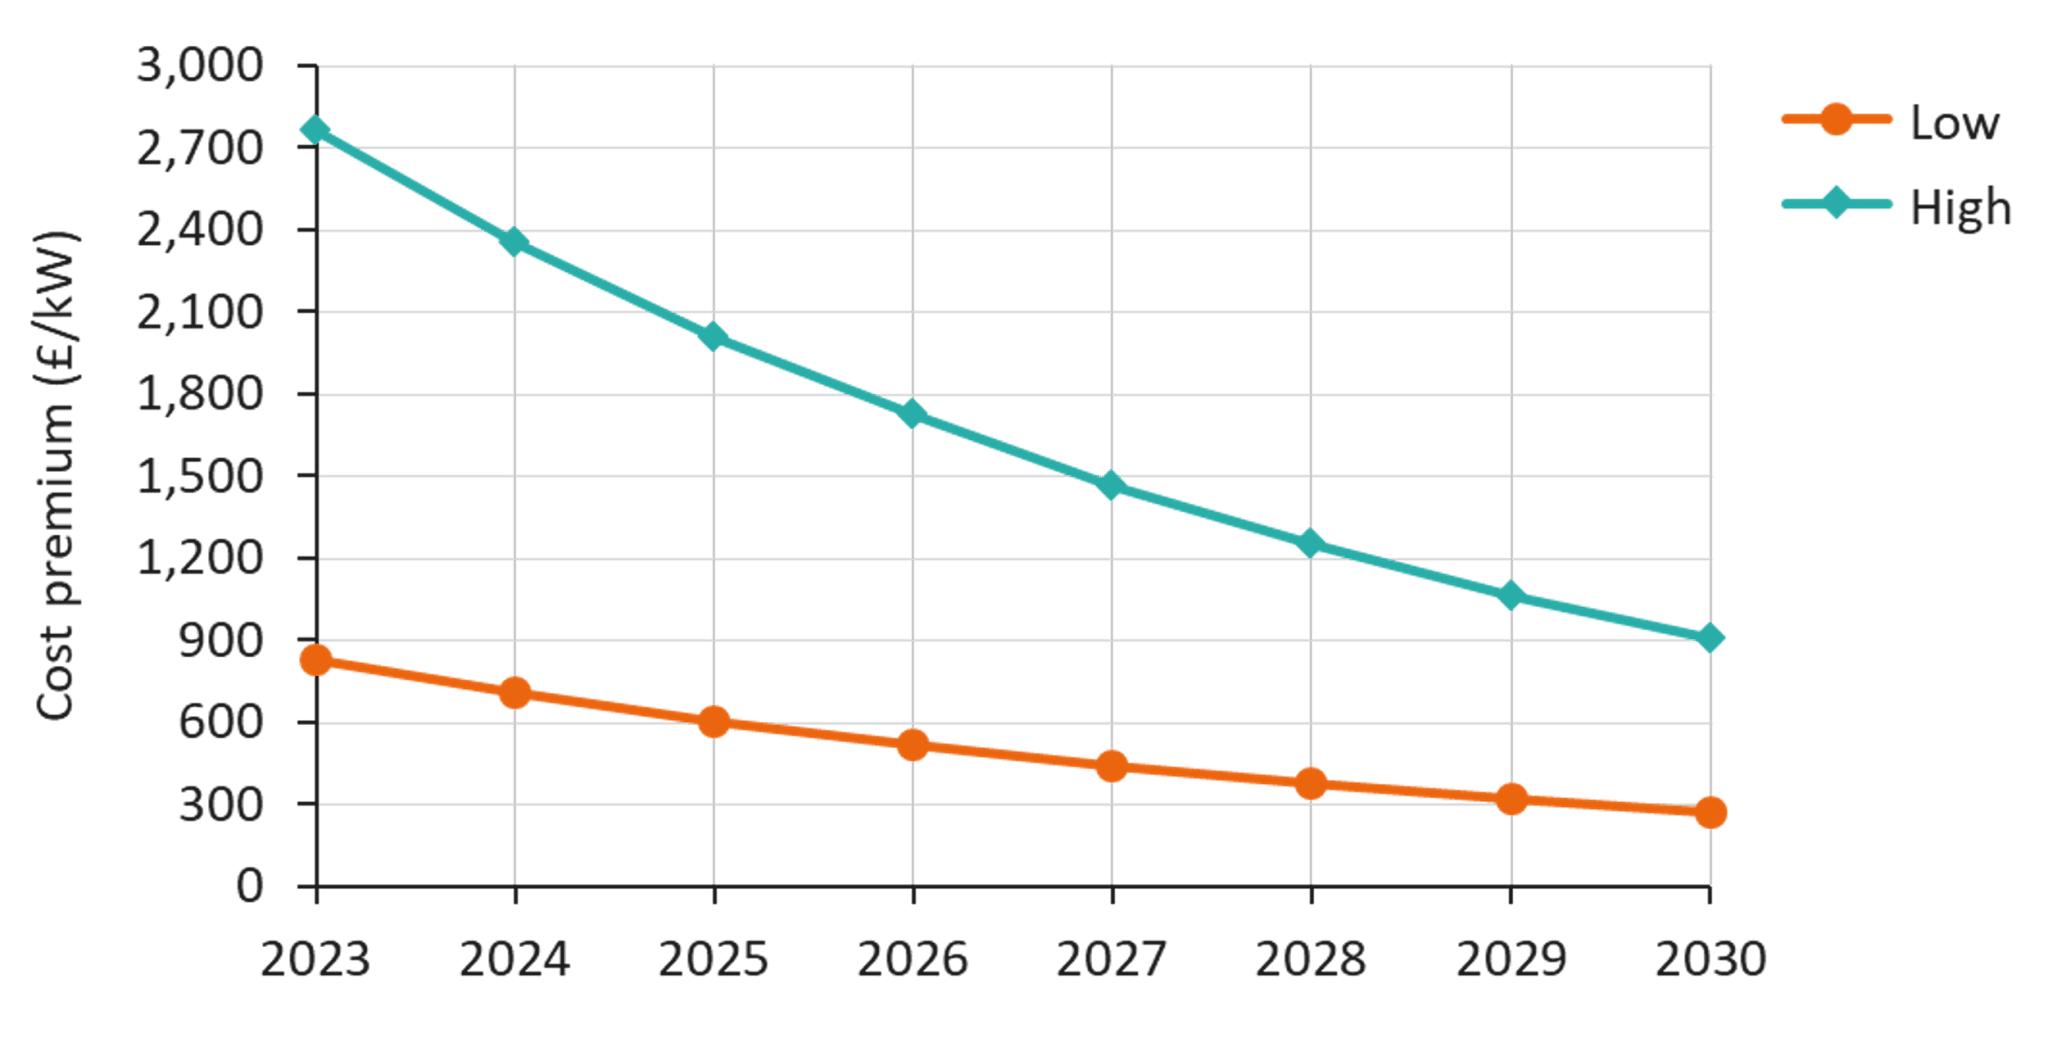 Chart showing the cost premium for low (orange line) and high (turquoise line) from 2023 to 2030. The high-cost scenario decreases from about 2,700 pounds per kilo-watt-hour in 2023 to about 900 pounds per kilo-watt-hour in 2030. The low-cost scenario decreases from about 900 pounds per kilo-watt-hour discharged in 2023 to about 300 pounds per kilo-watt-hour in 2030.